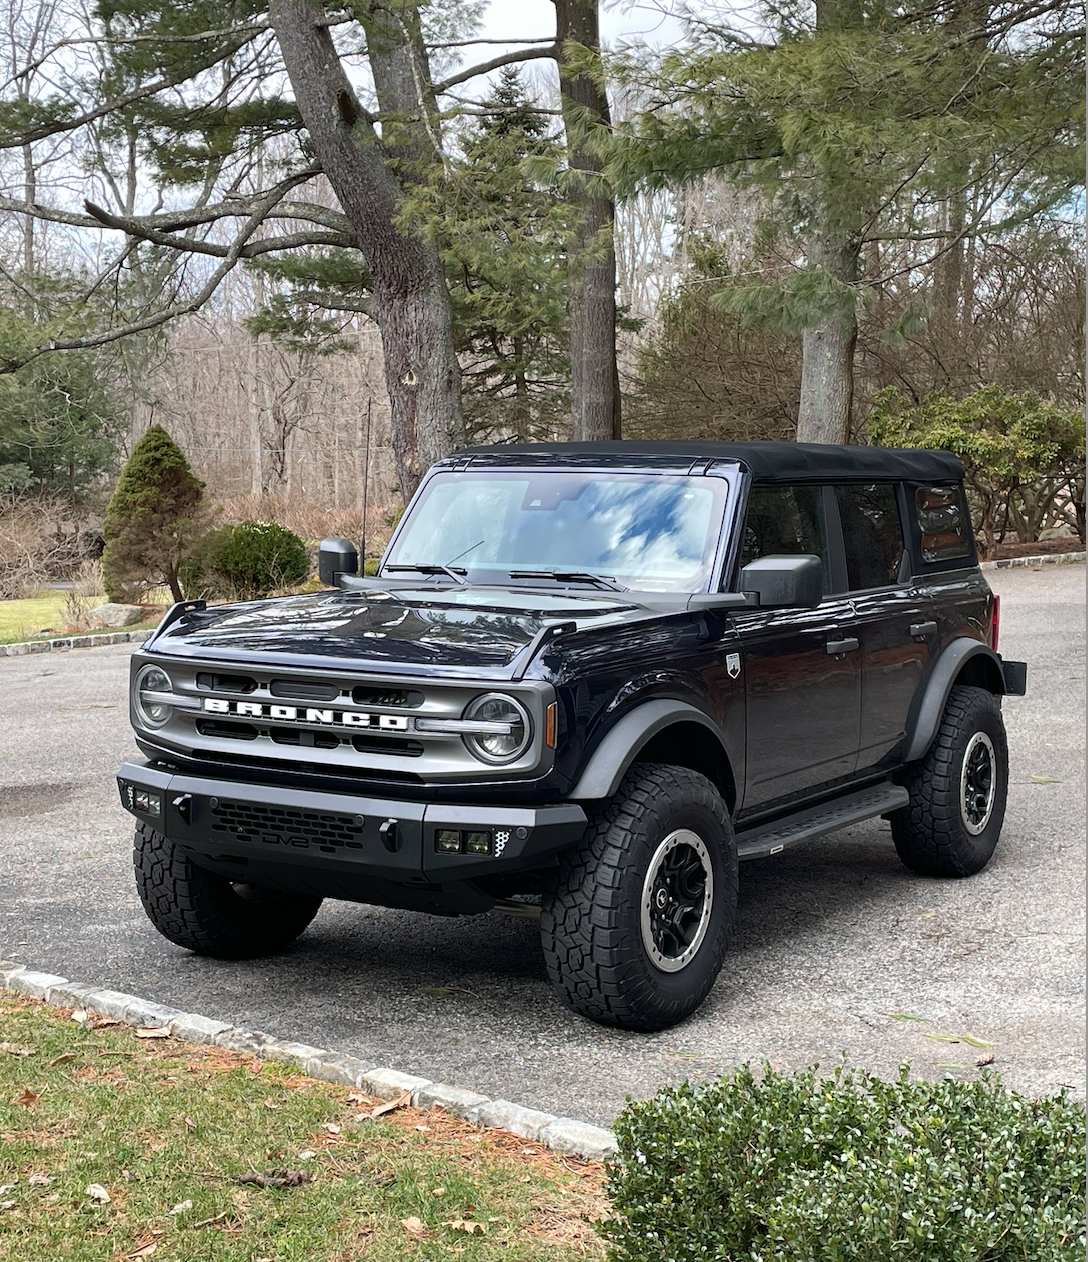 Ford Bronco Then & Now: show your assembly line Bronco and current Bronco picture Screen Shot 2023-01-21 at 11.52.00 AM